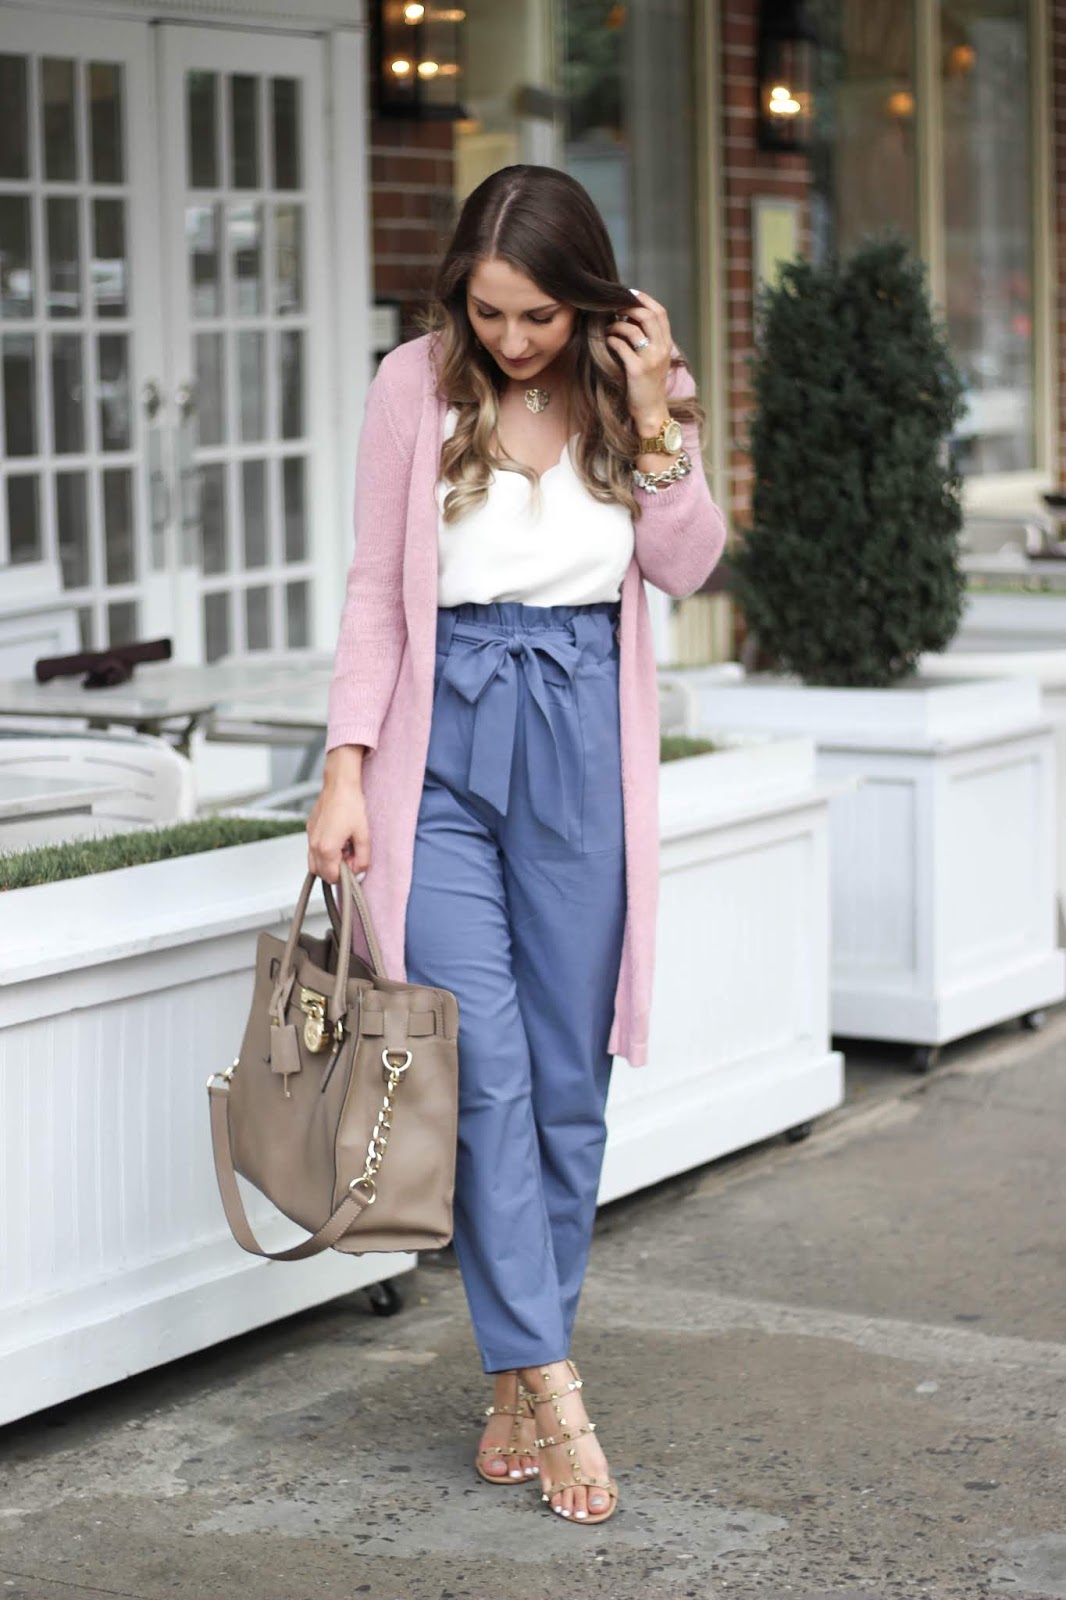 FASHIONABLE WORK OUTFIT, PAPER BAG PANTS + SCALLOP CAMI & PINK CARDIGAN